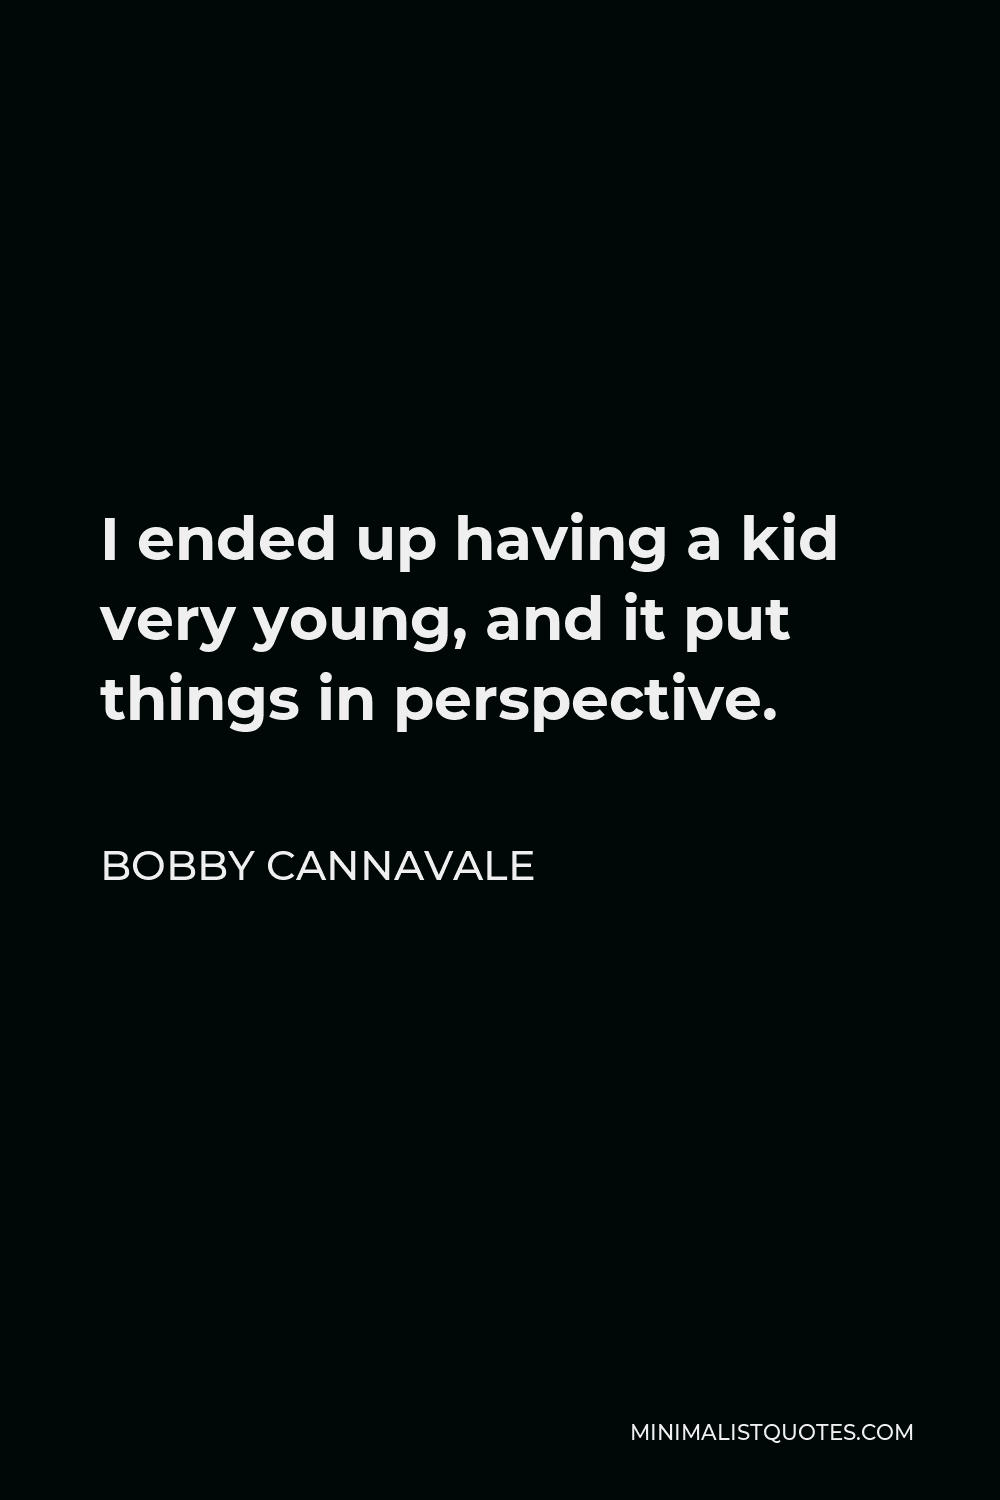 Bobby Cannavale Quote - I ended up having a kid very young, and it put things in perspective.